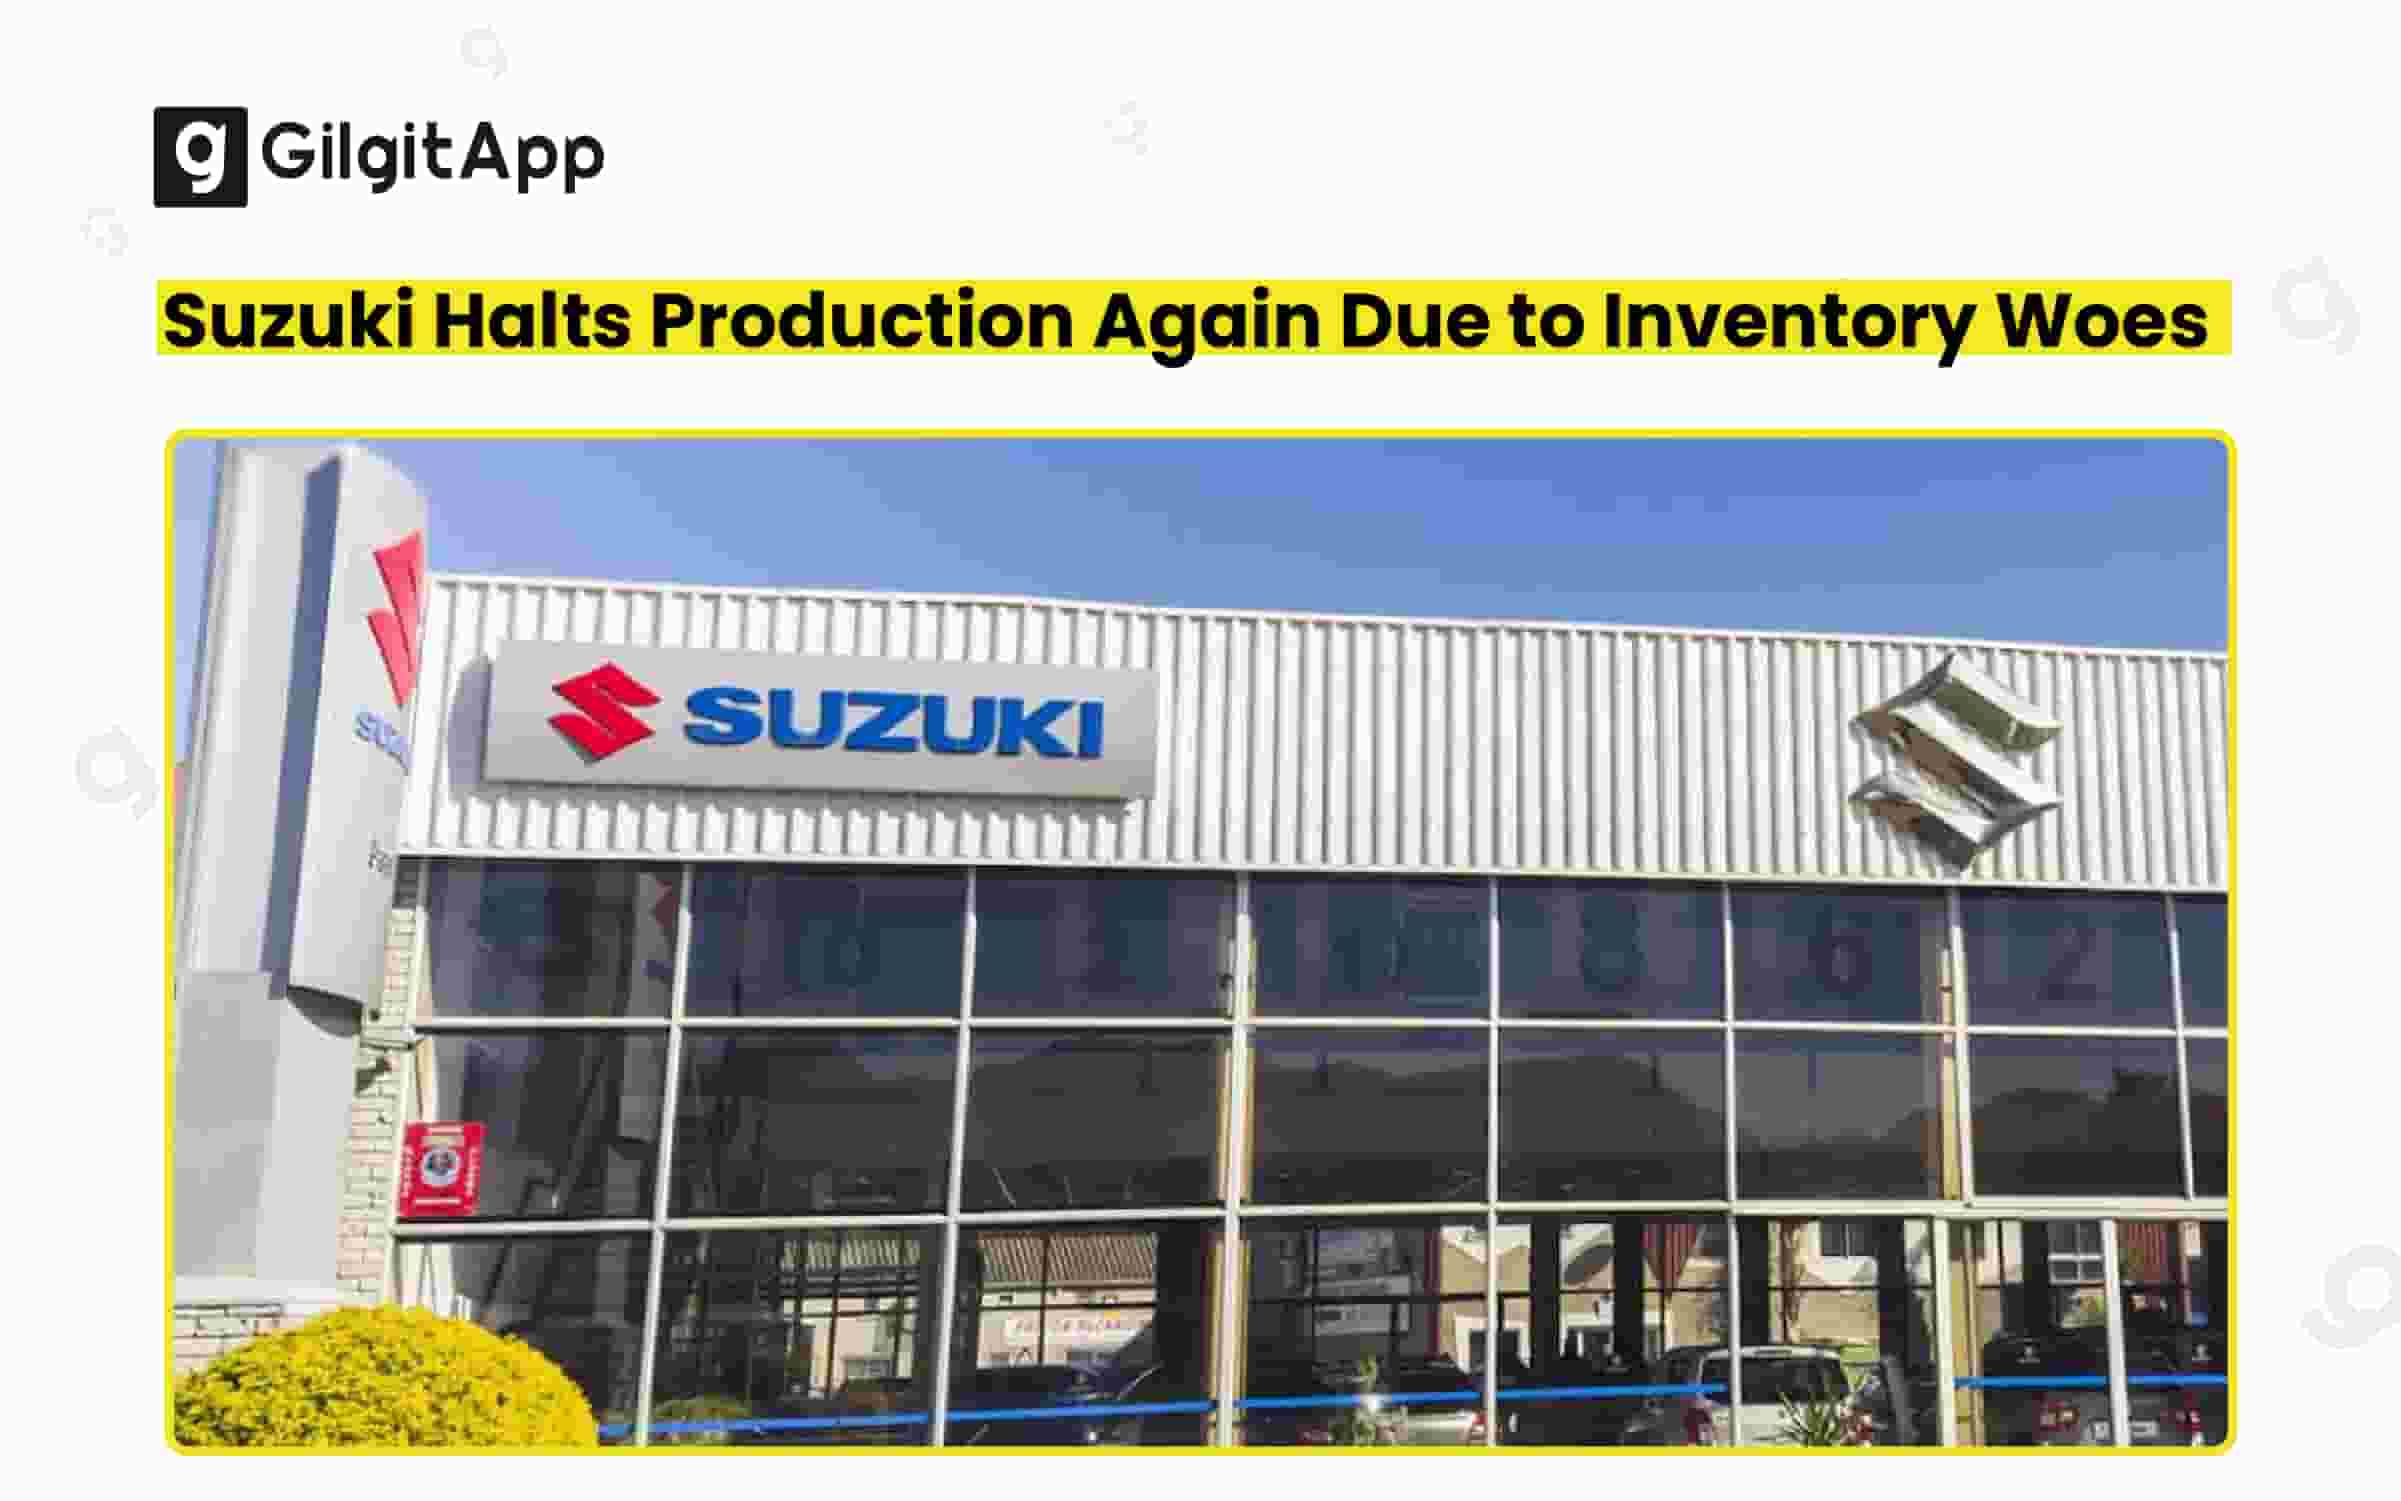 Suzuki Halts Production Again Due to Inventory Woes